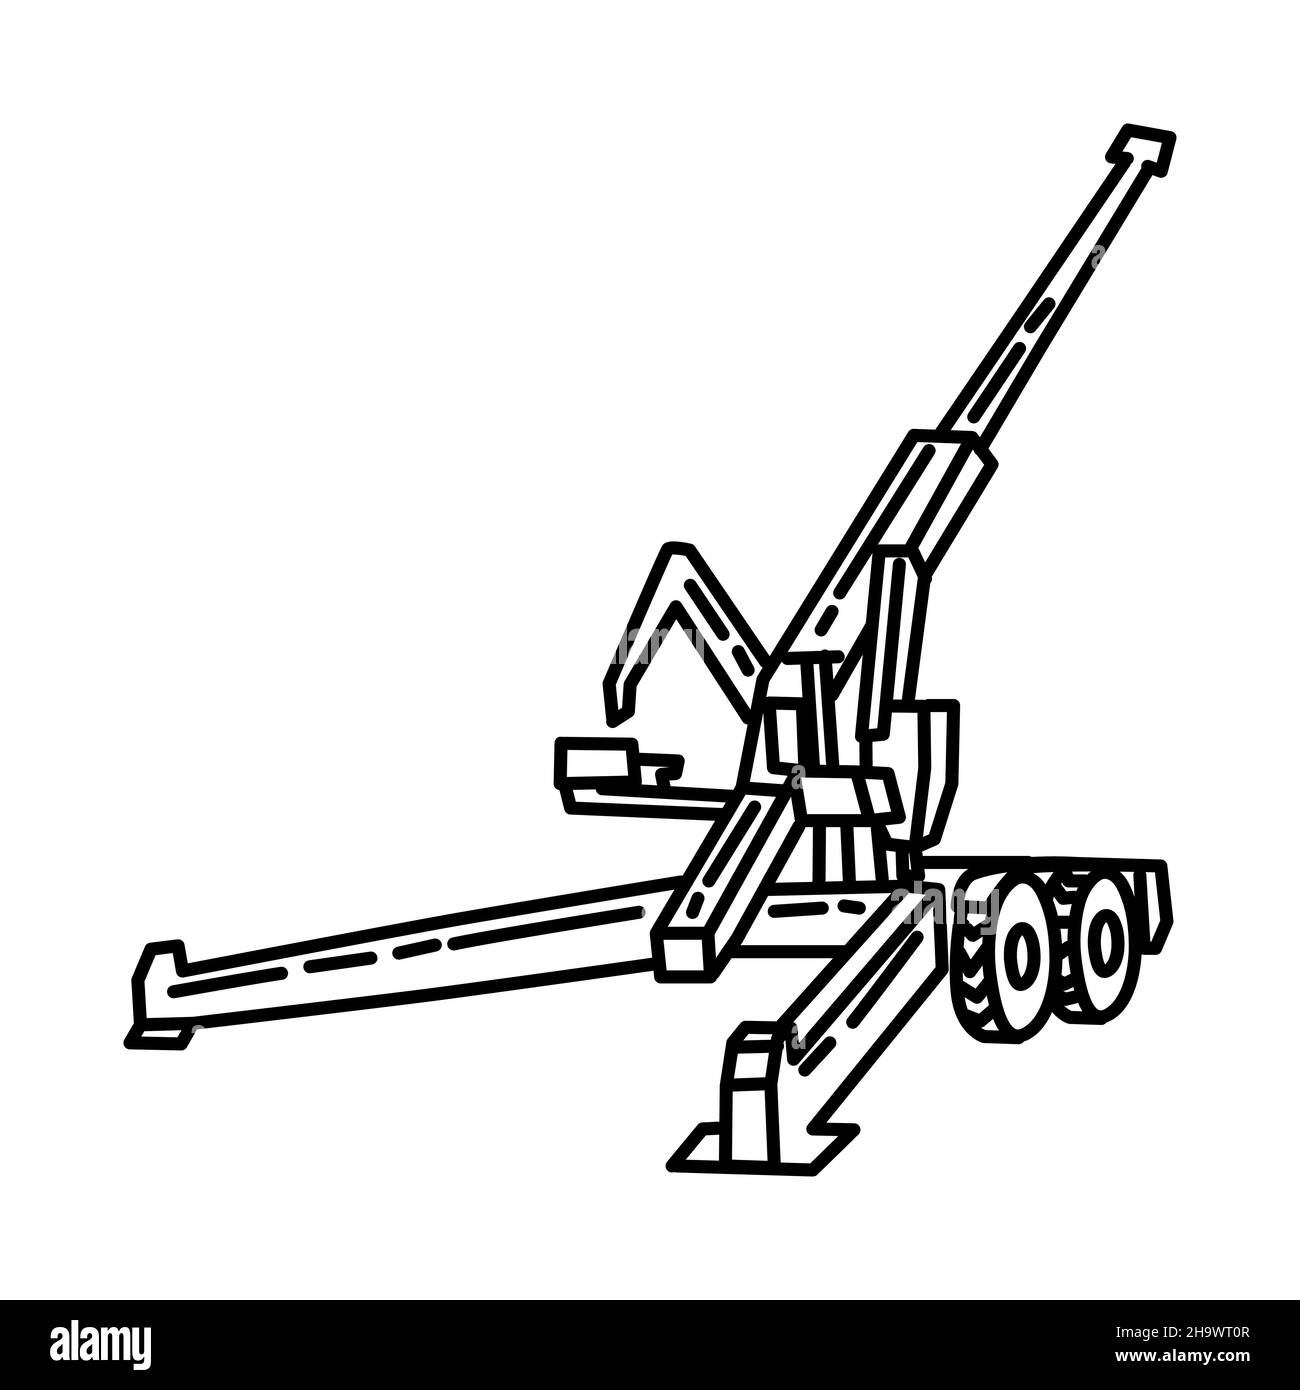 Marine Corps Howitzer Part of Military and Marine Corps Equipments Hand Drawn Icon Set Vector Stock Vector